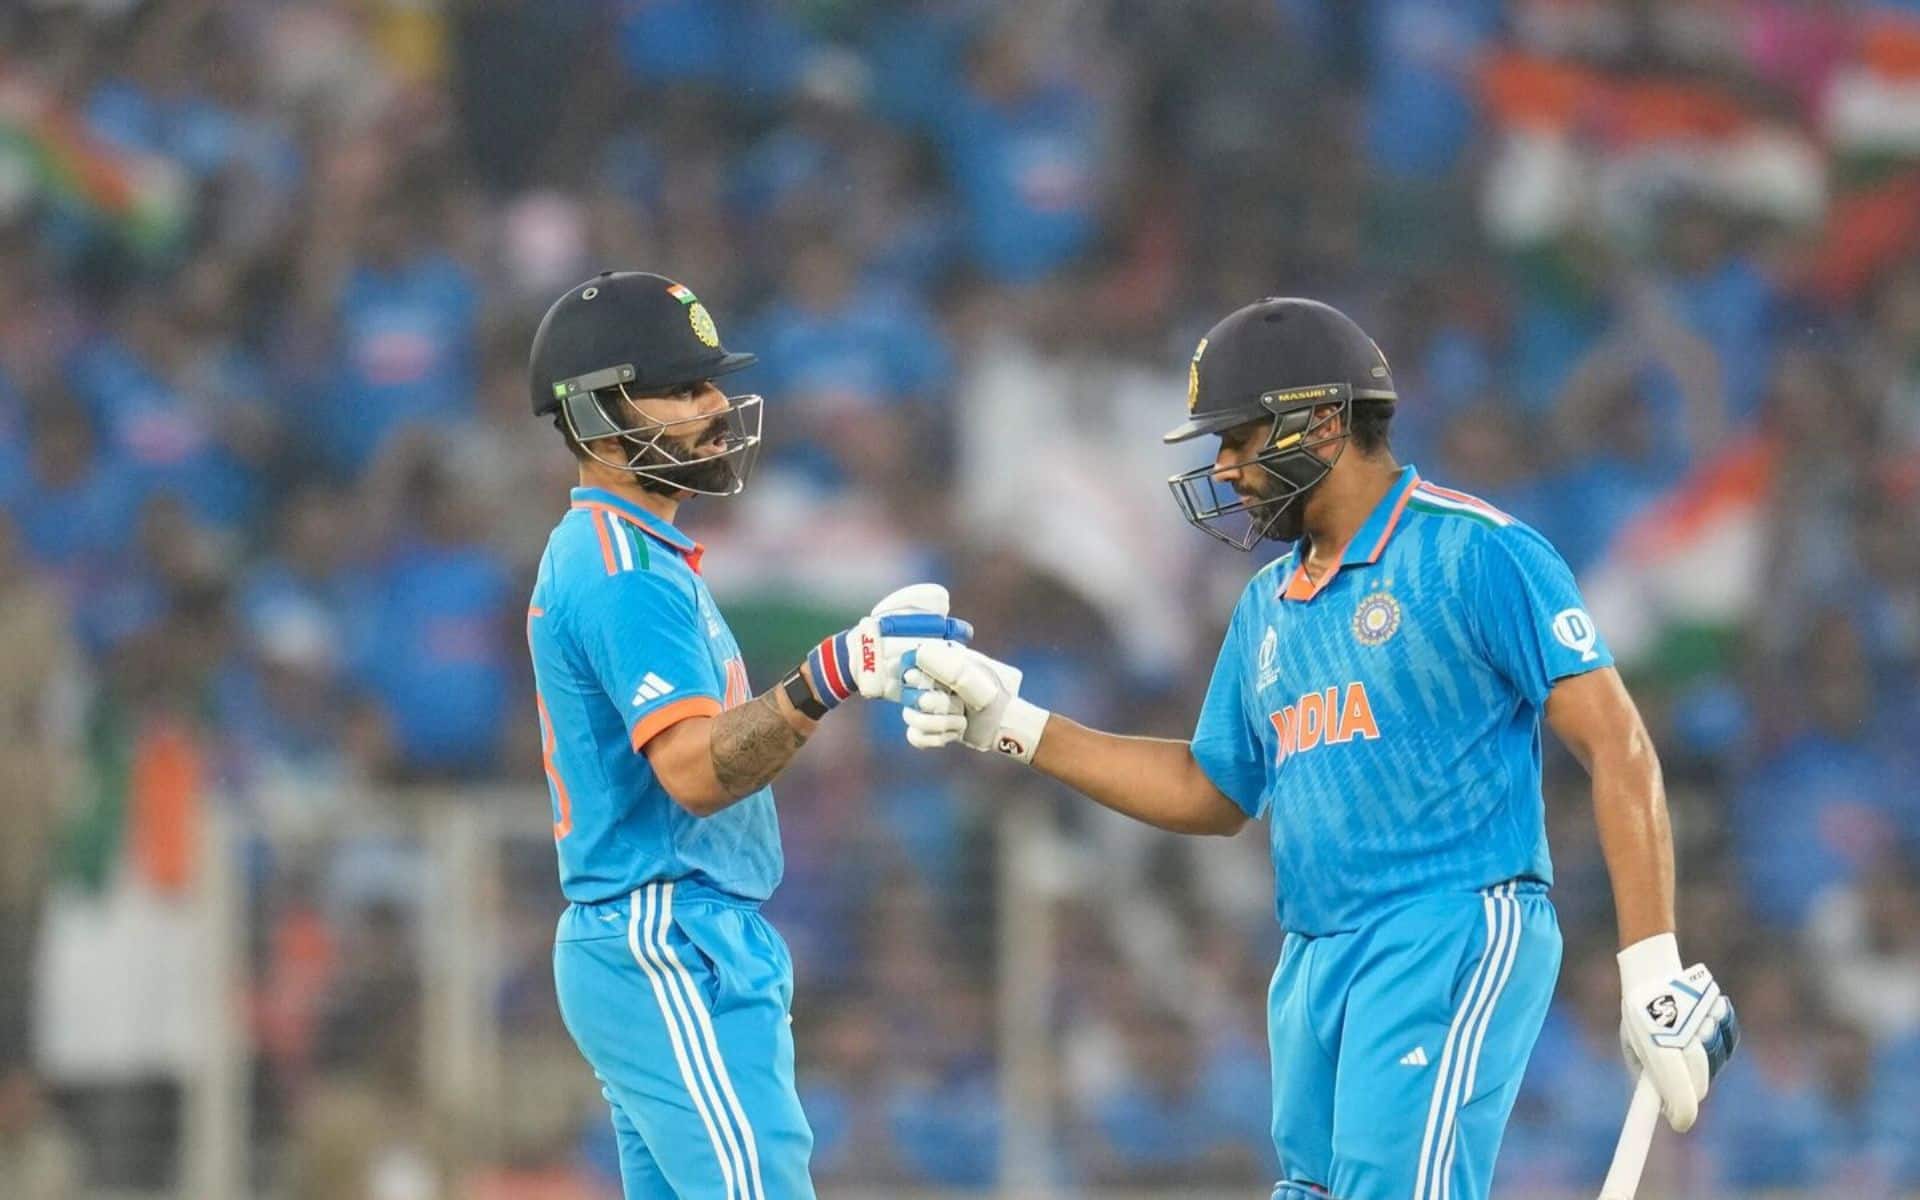 Virat Kohli and Rohit Sharma are likely to open for India in T20 WC (X.com)